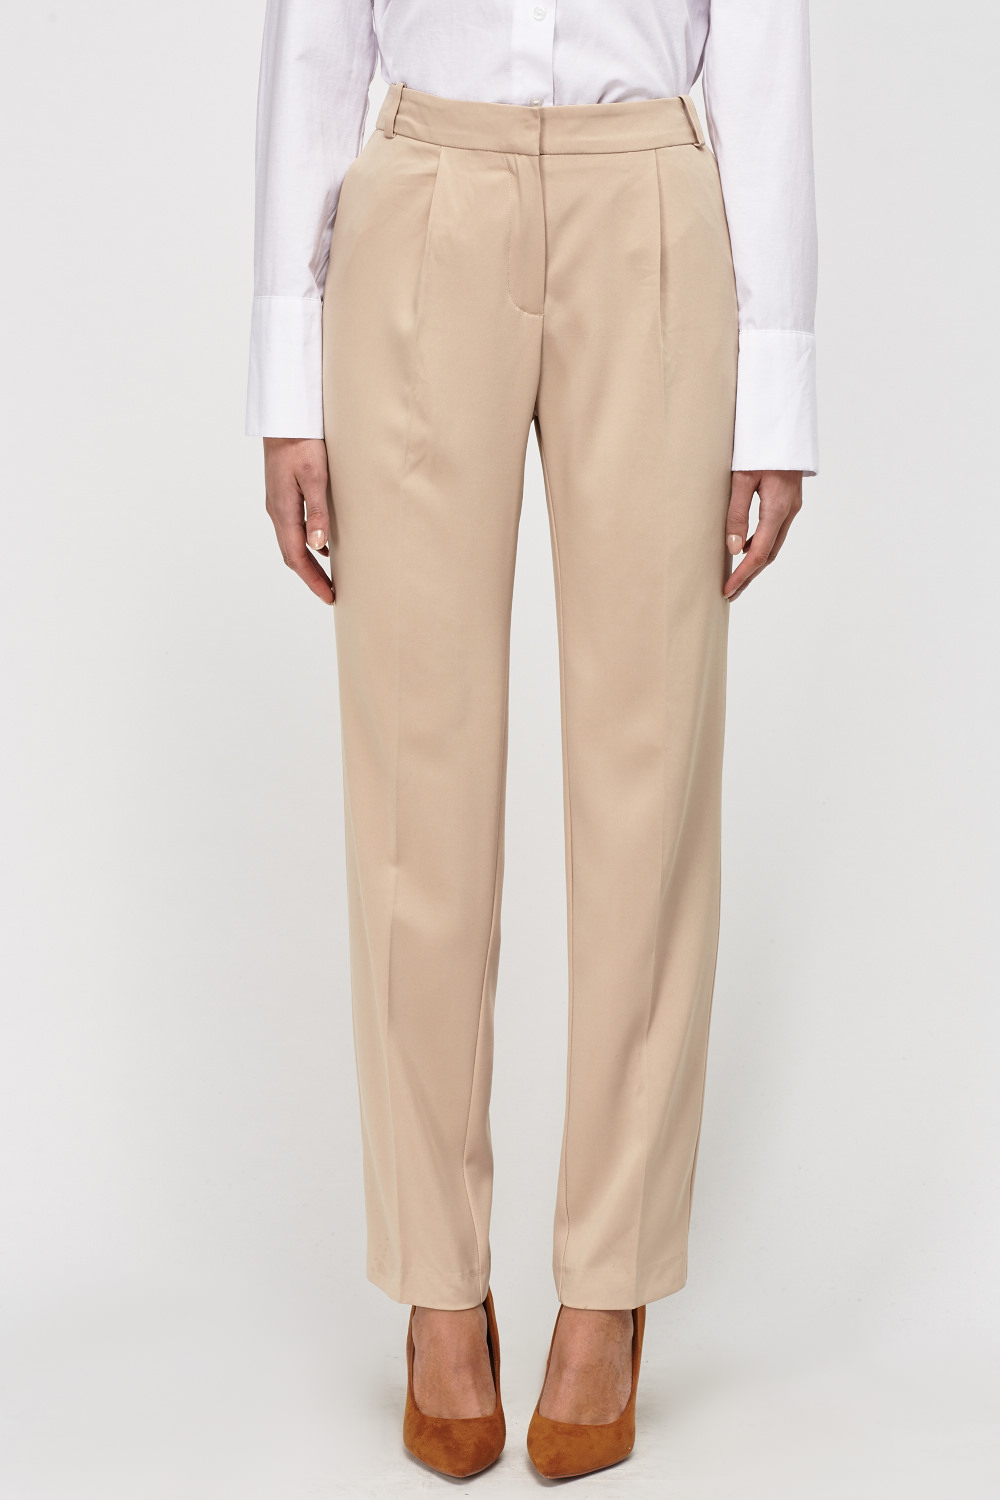 Beige Casual Trousers - Just $6